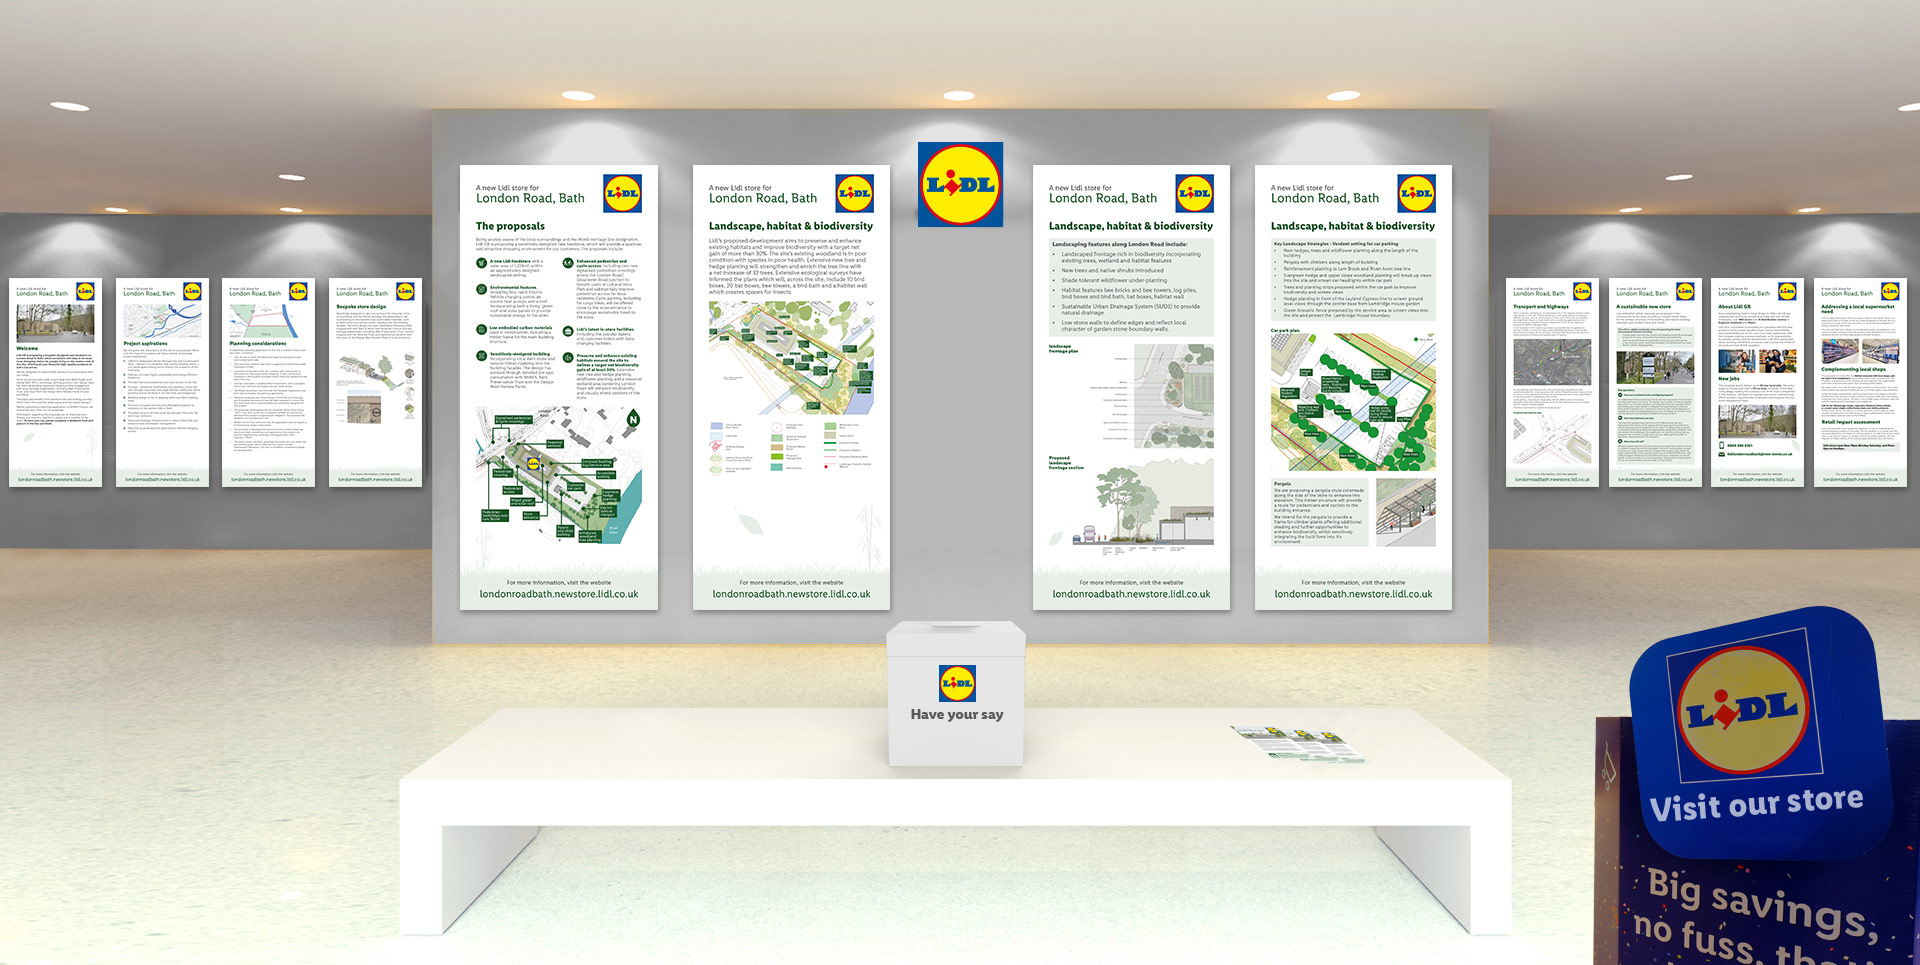 Exhibition banners